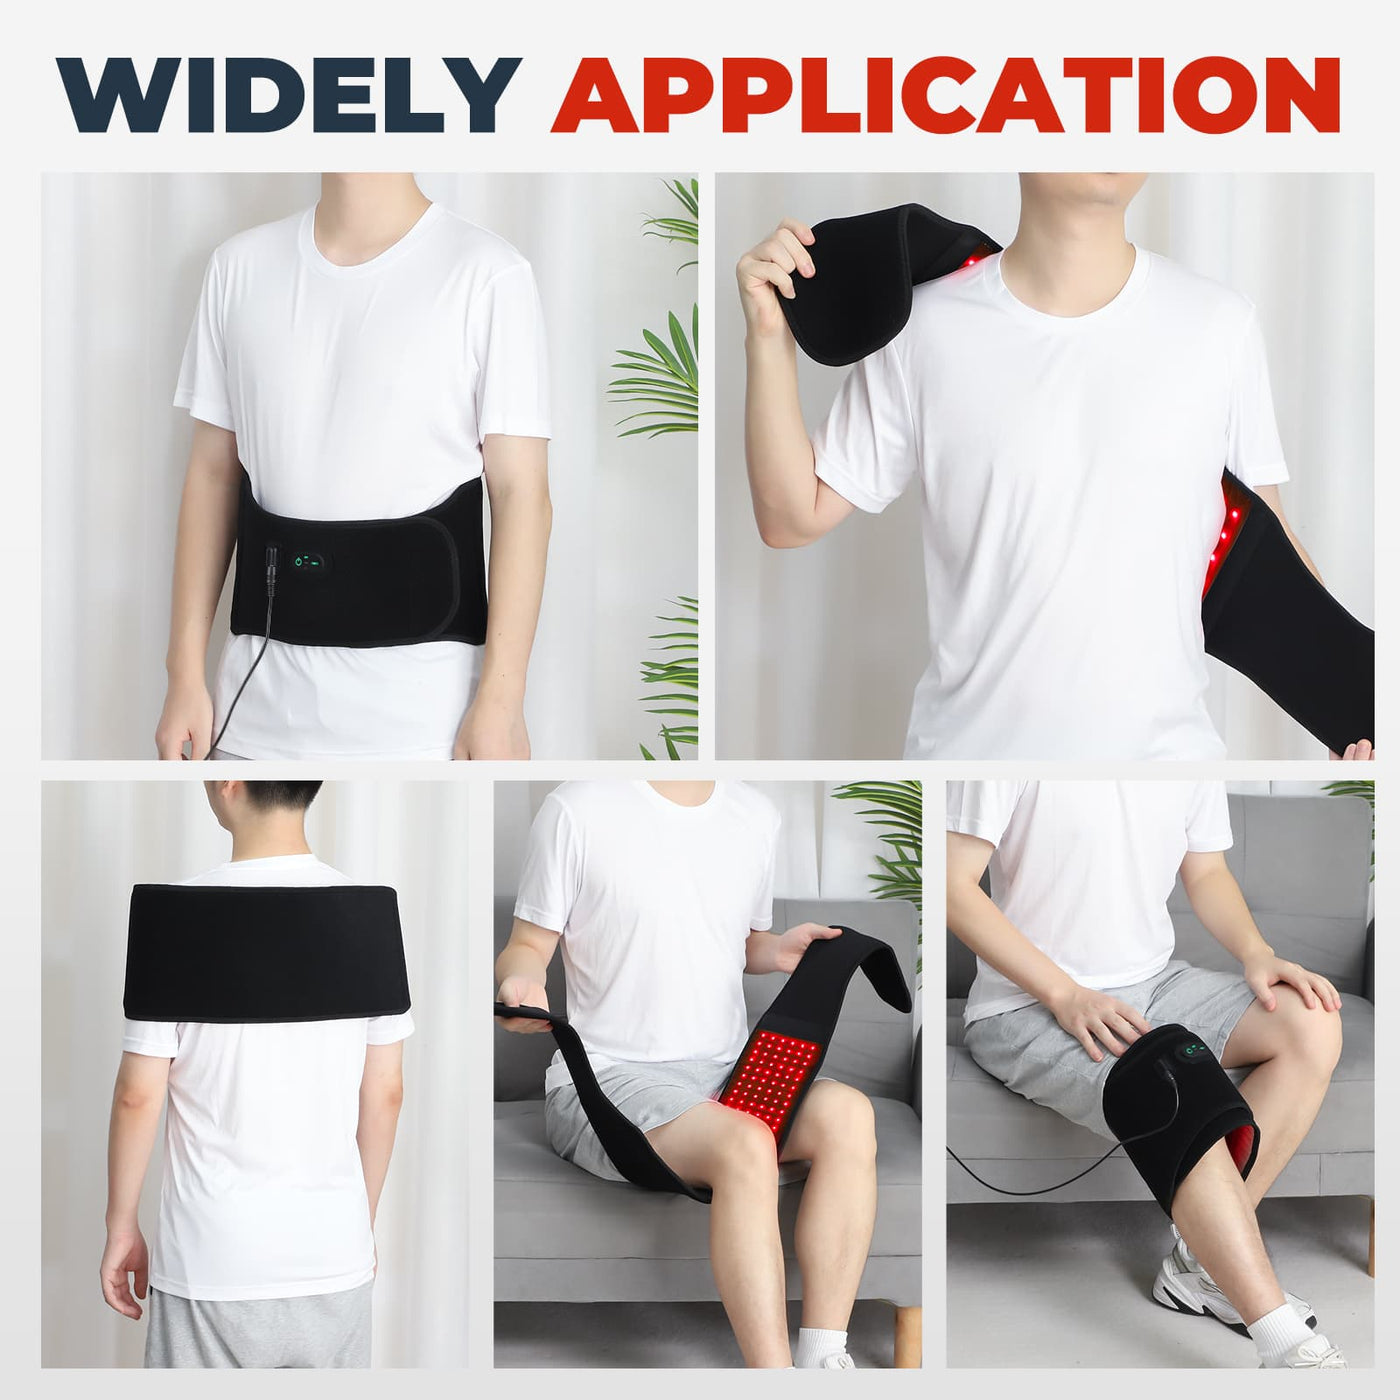 widely application of red light therapy belt